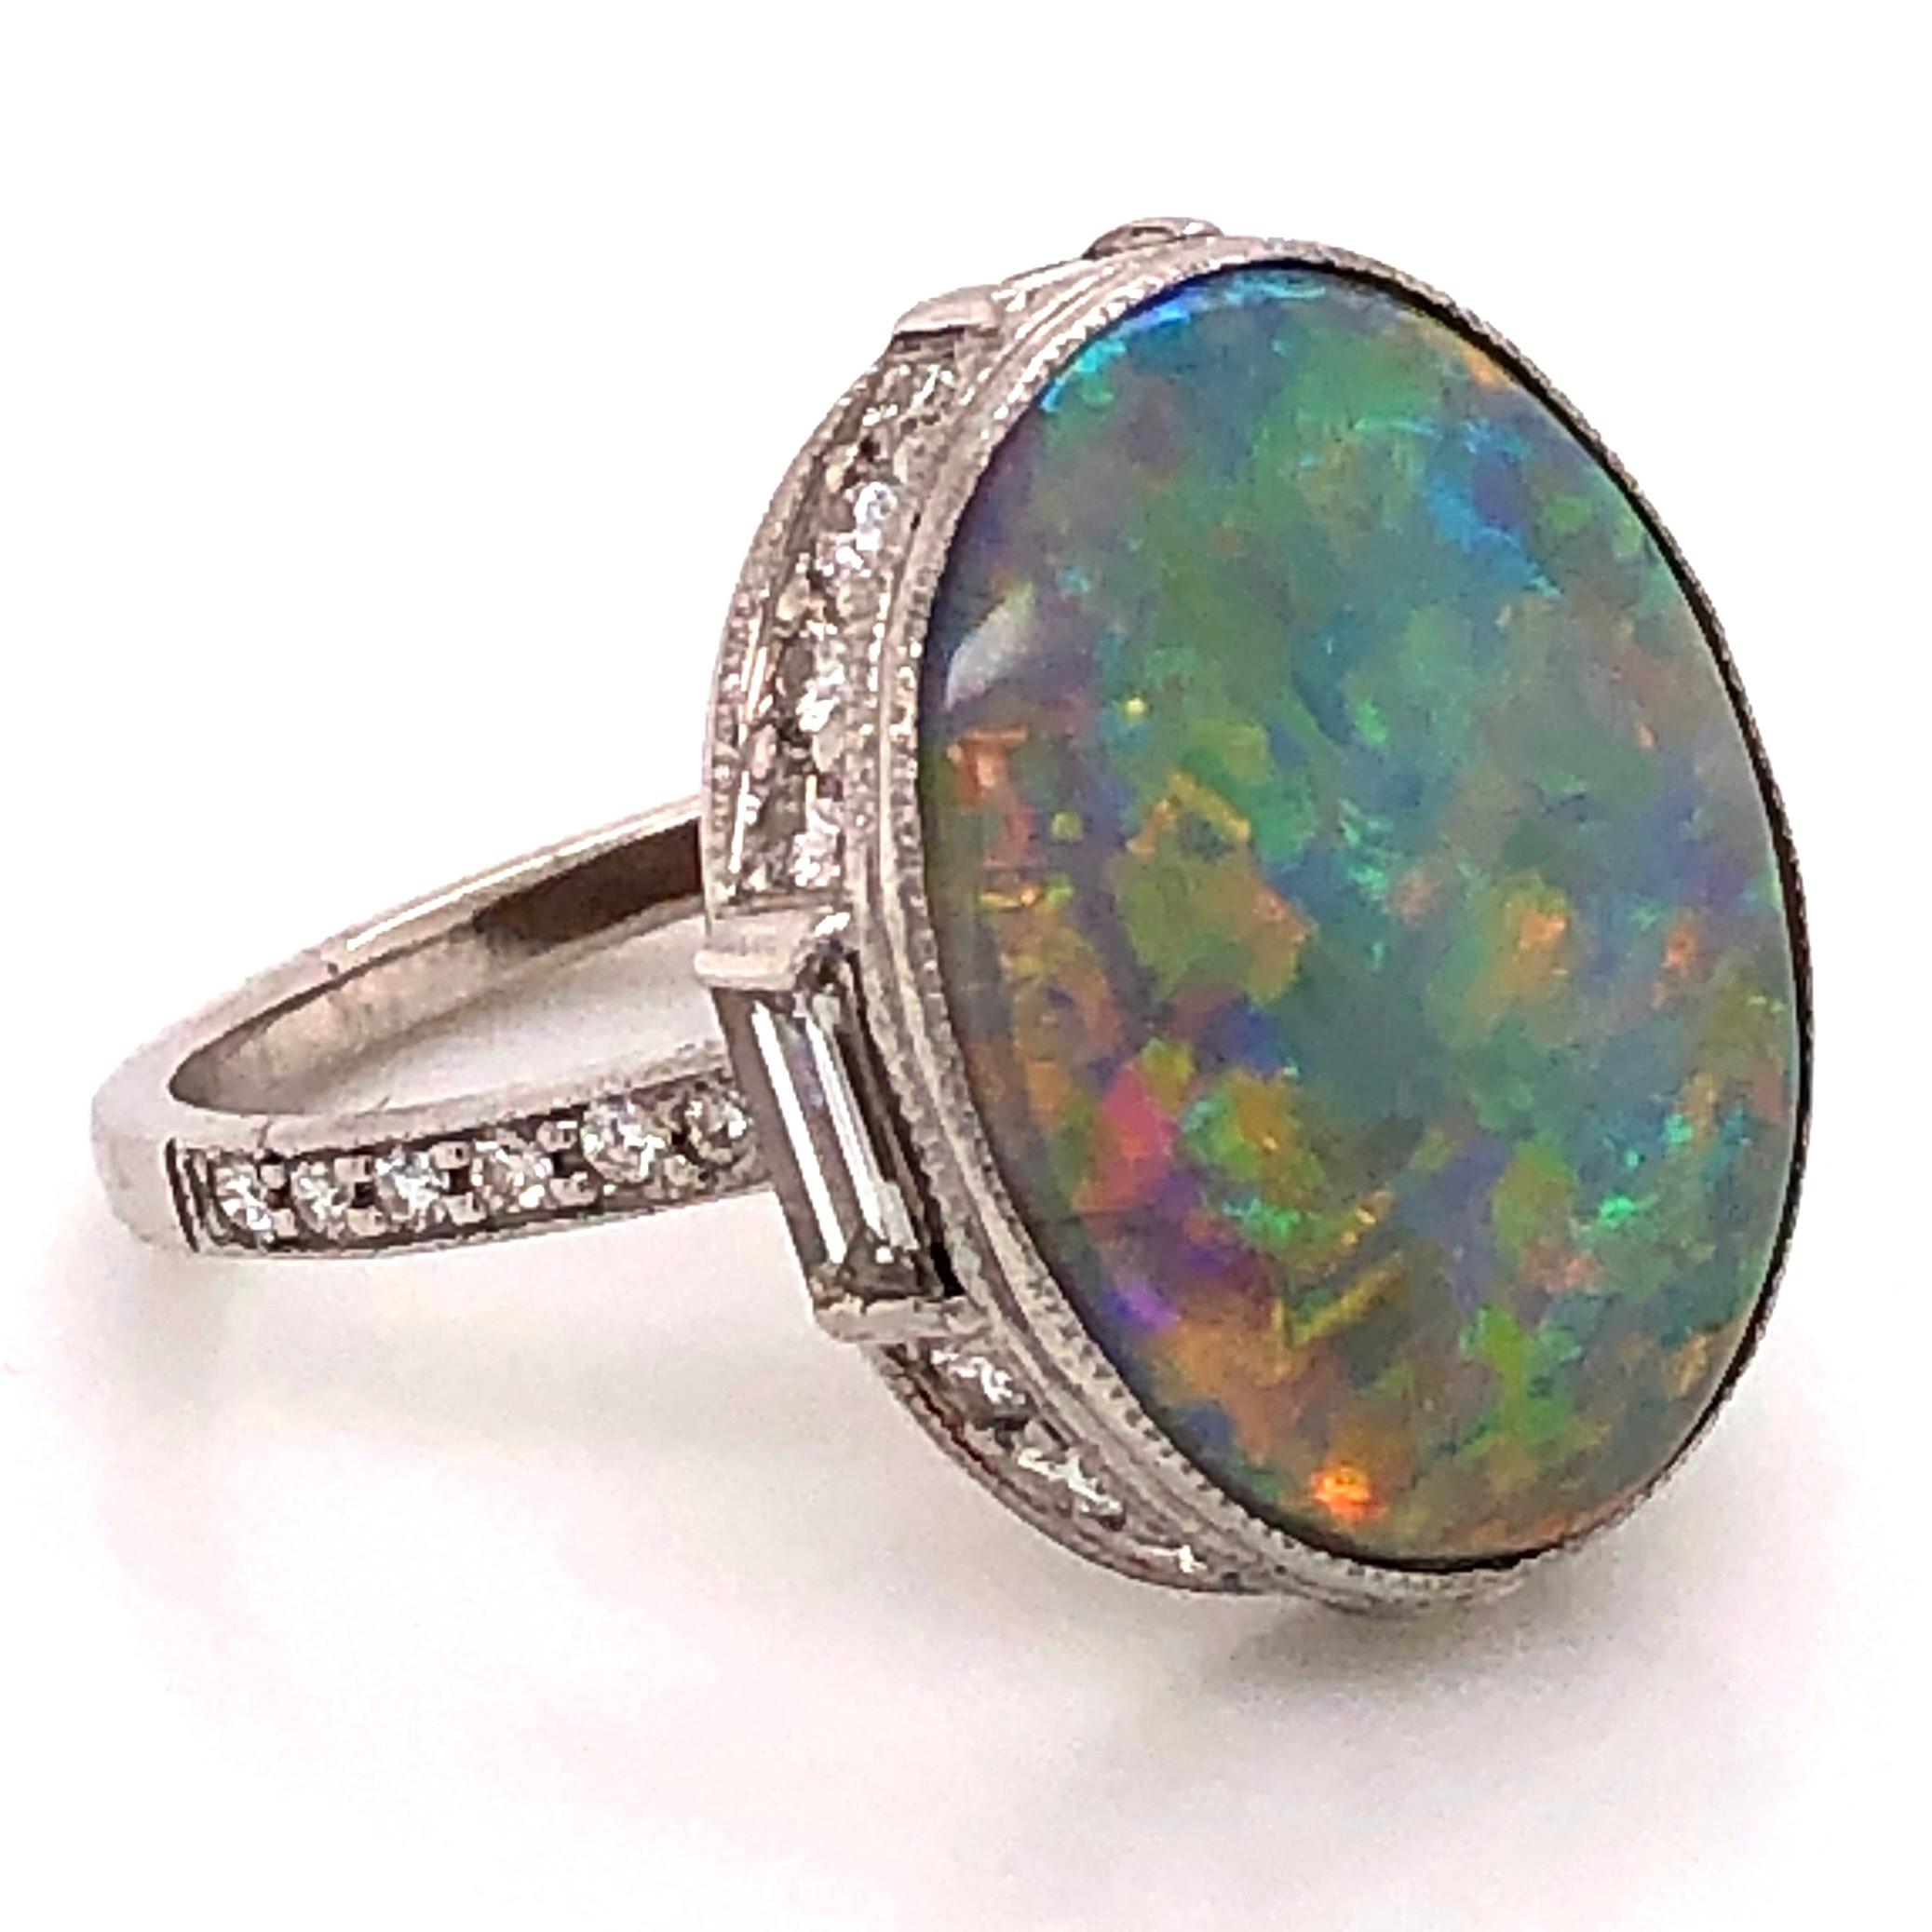 Fabulous Dark Gray Opal and Diamond Cocktail Ring. Securely set with a 5.37 Carat Opal, beautifully accented surround of round and baguette Diamonds, weighing approx. 1.15tcw. Finely detailed Hand crafted Platinum mounting. Ring measures approx.